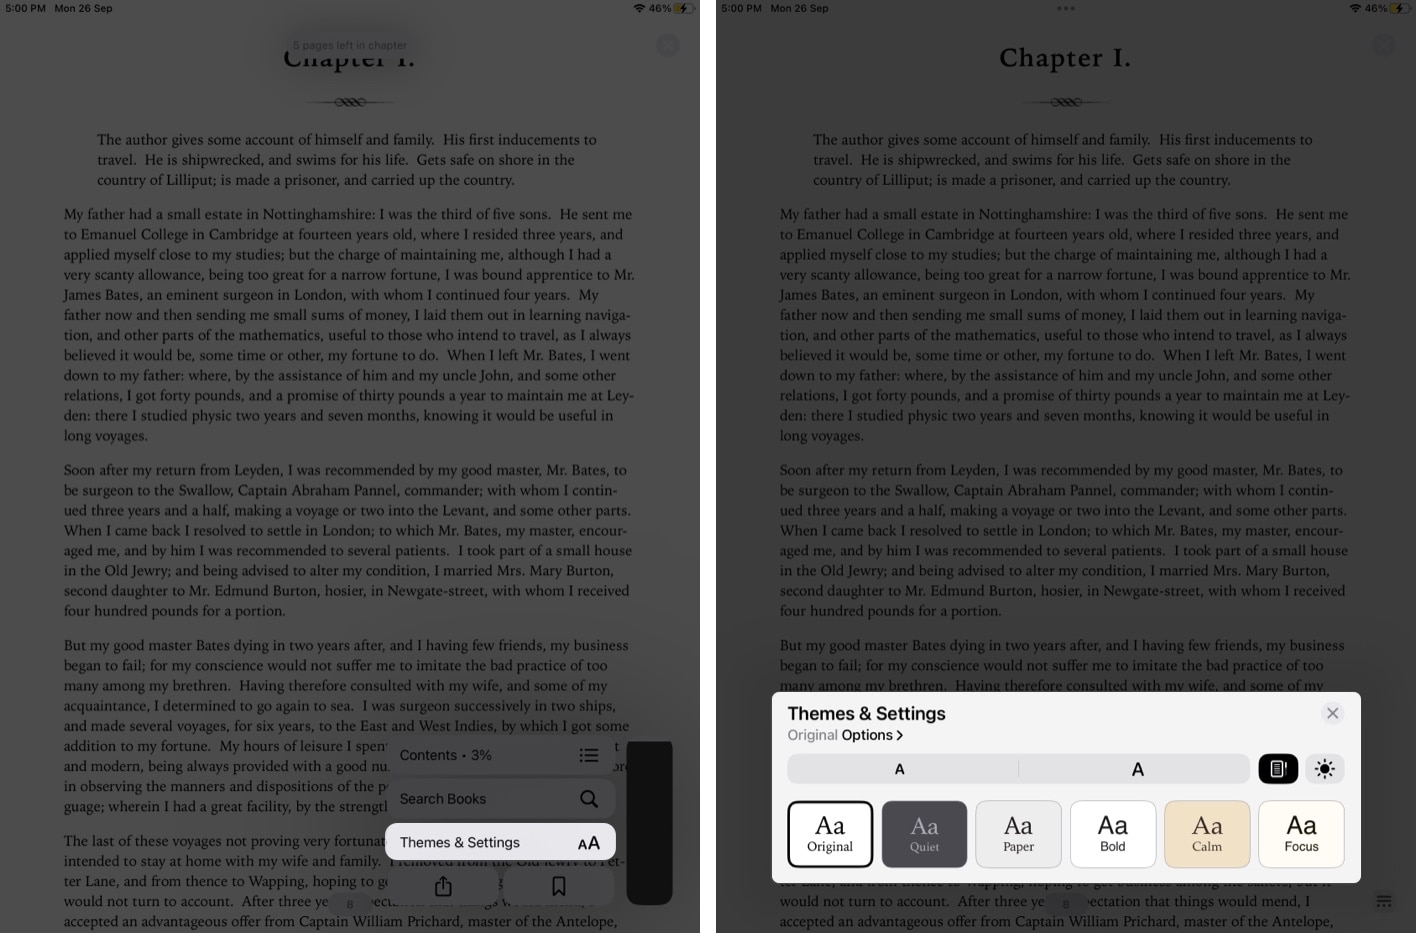 Changing or Adjusting Themes and Settings in iPad Books app